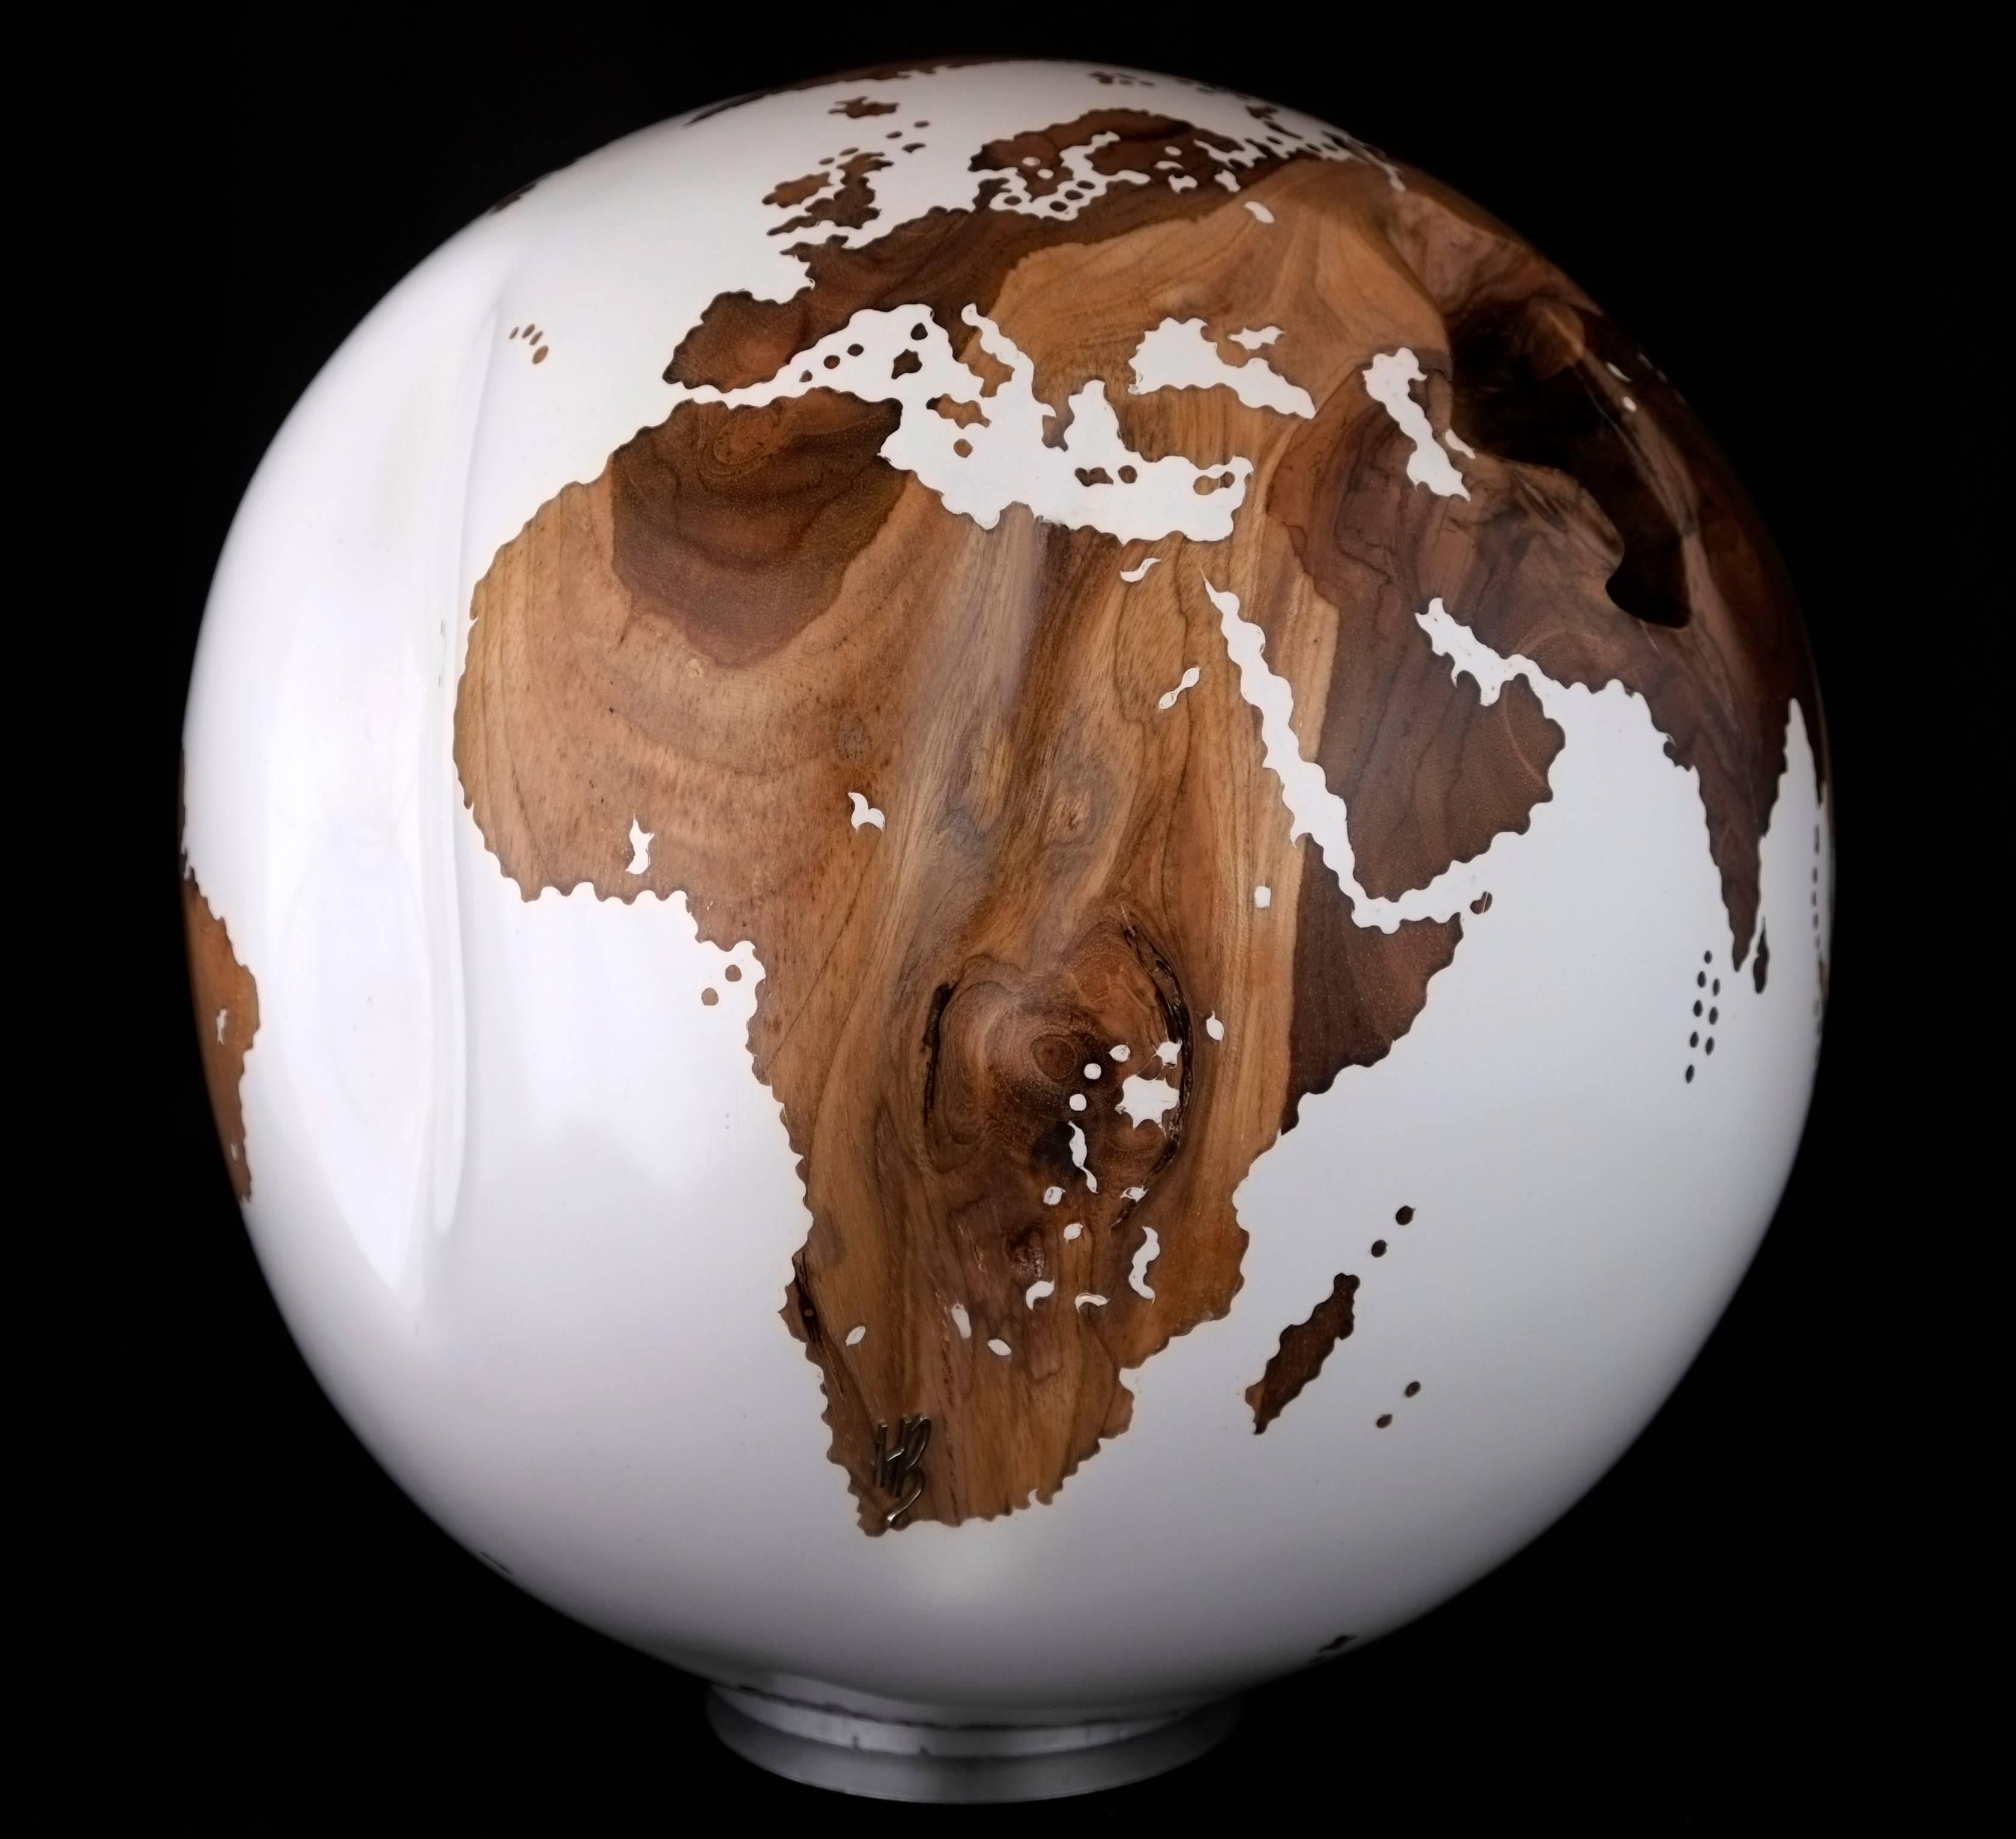 Stunning small wooden globe made of reclaimed teak root in acrylic white resin finishing.

Dimension: 7.87 In / 20 cm
Materials: Reclaimed teak root, acrylic white resin, mounted on aluminium bearing for easy rotation, signed and